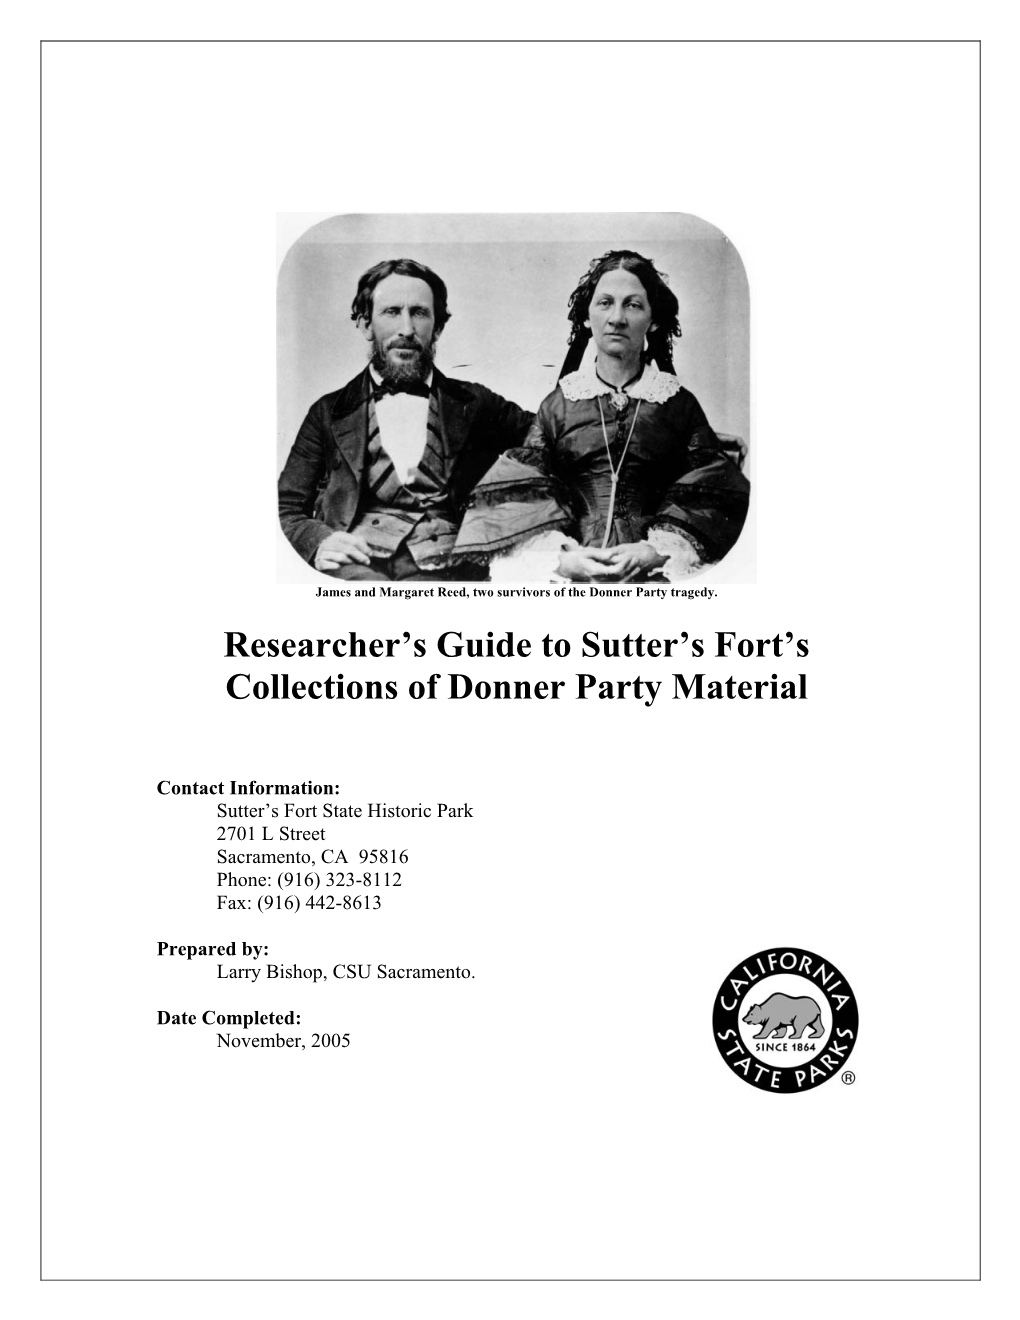 Researcher's Guide to Sutter's Fort's Collections of Donner Party Material